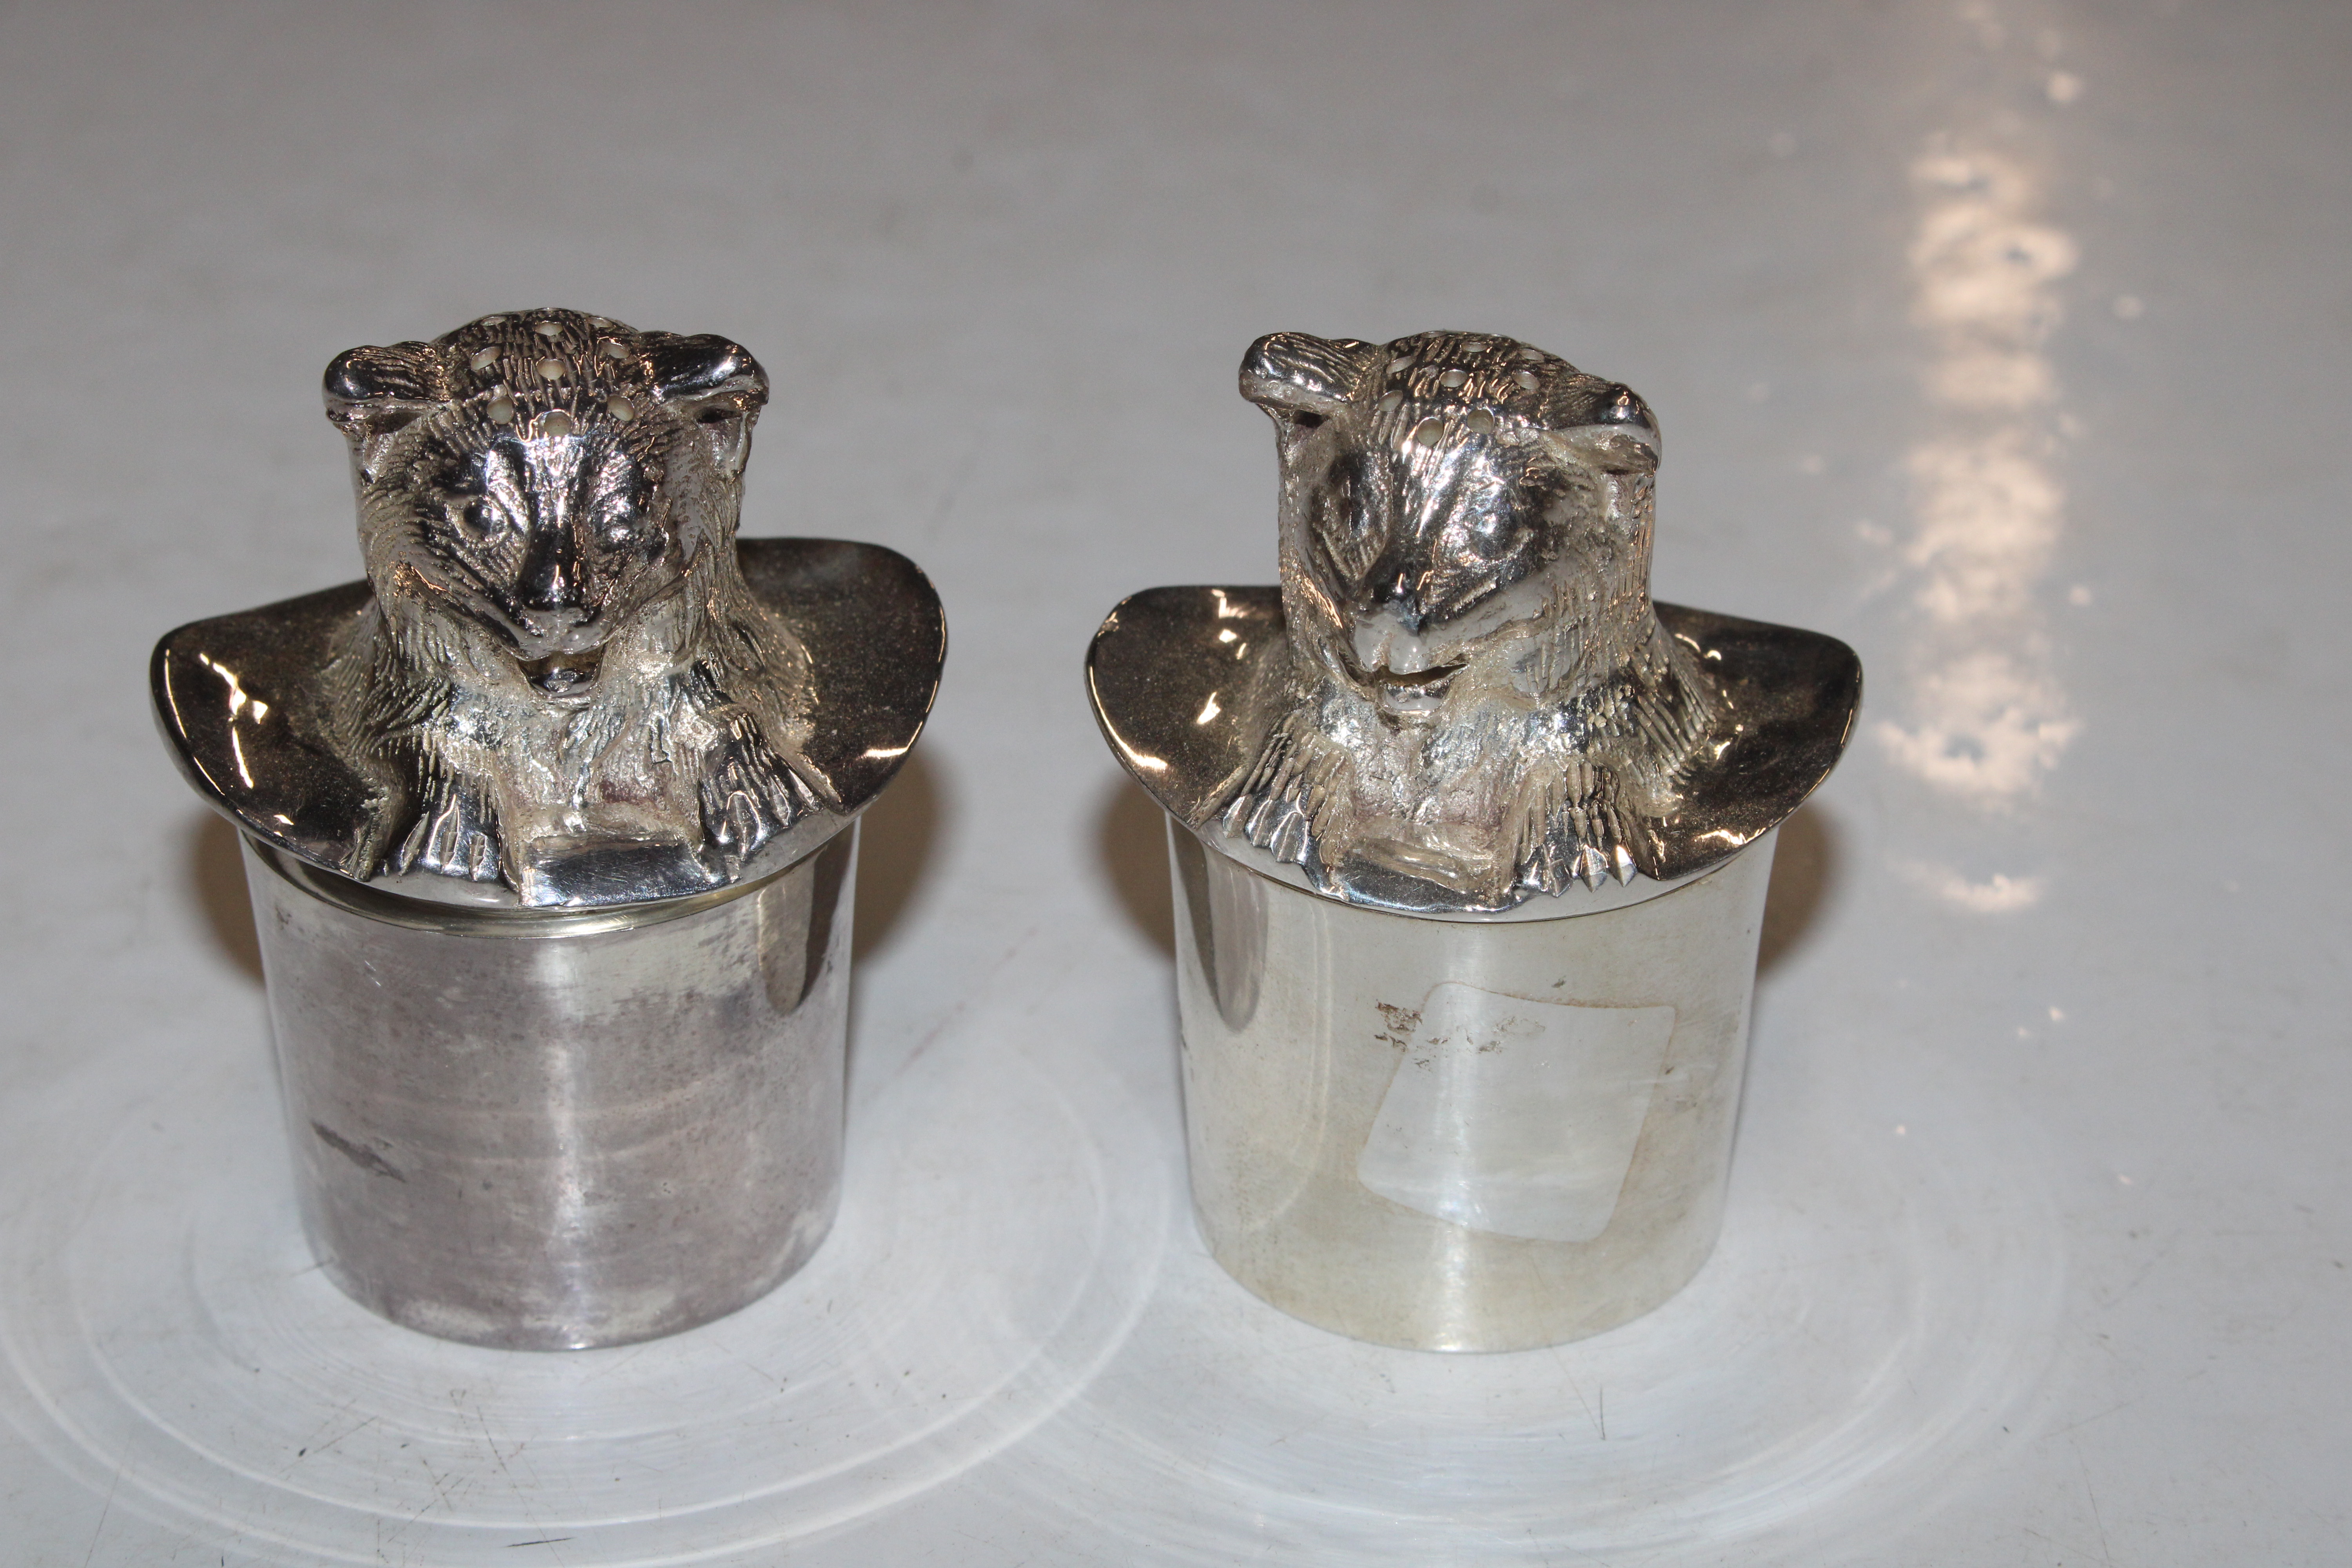 A pair of silver plated "Cat In The Hat" salt and